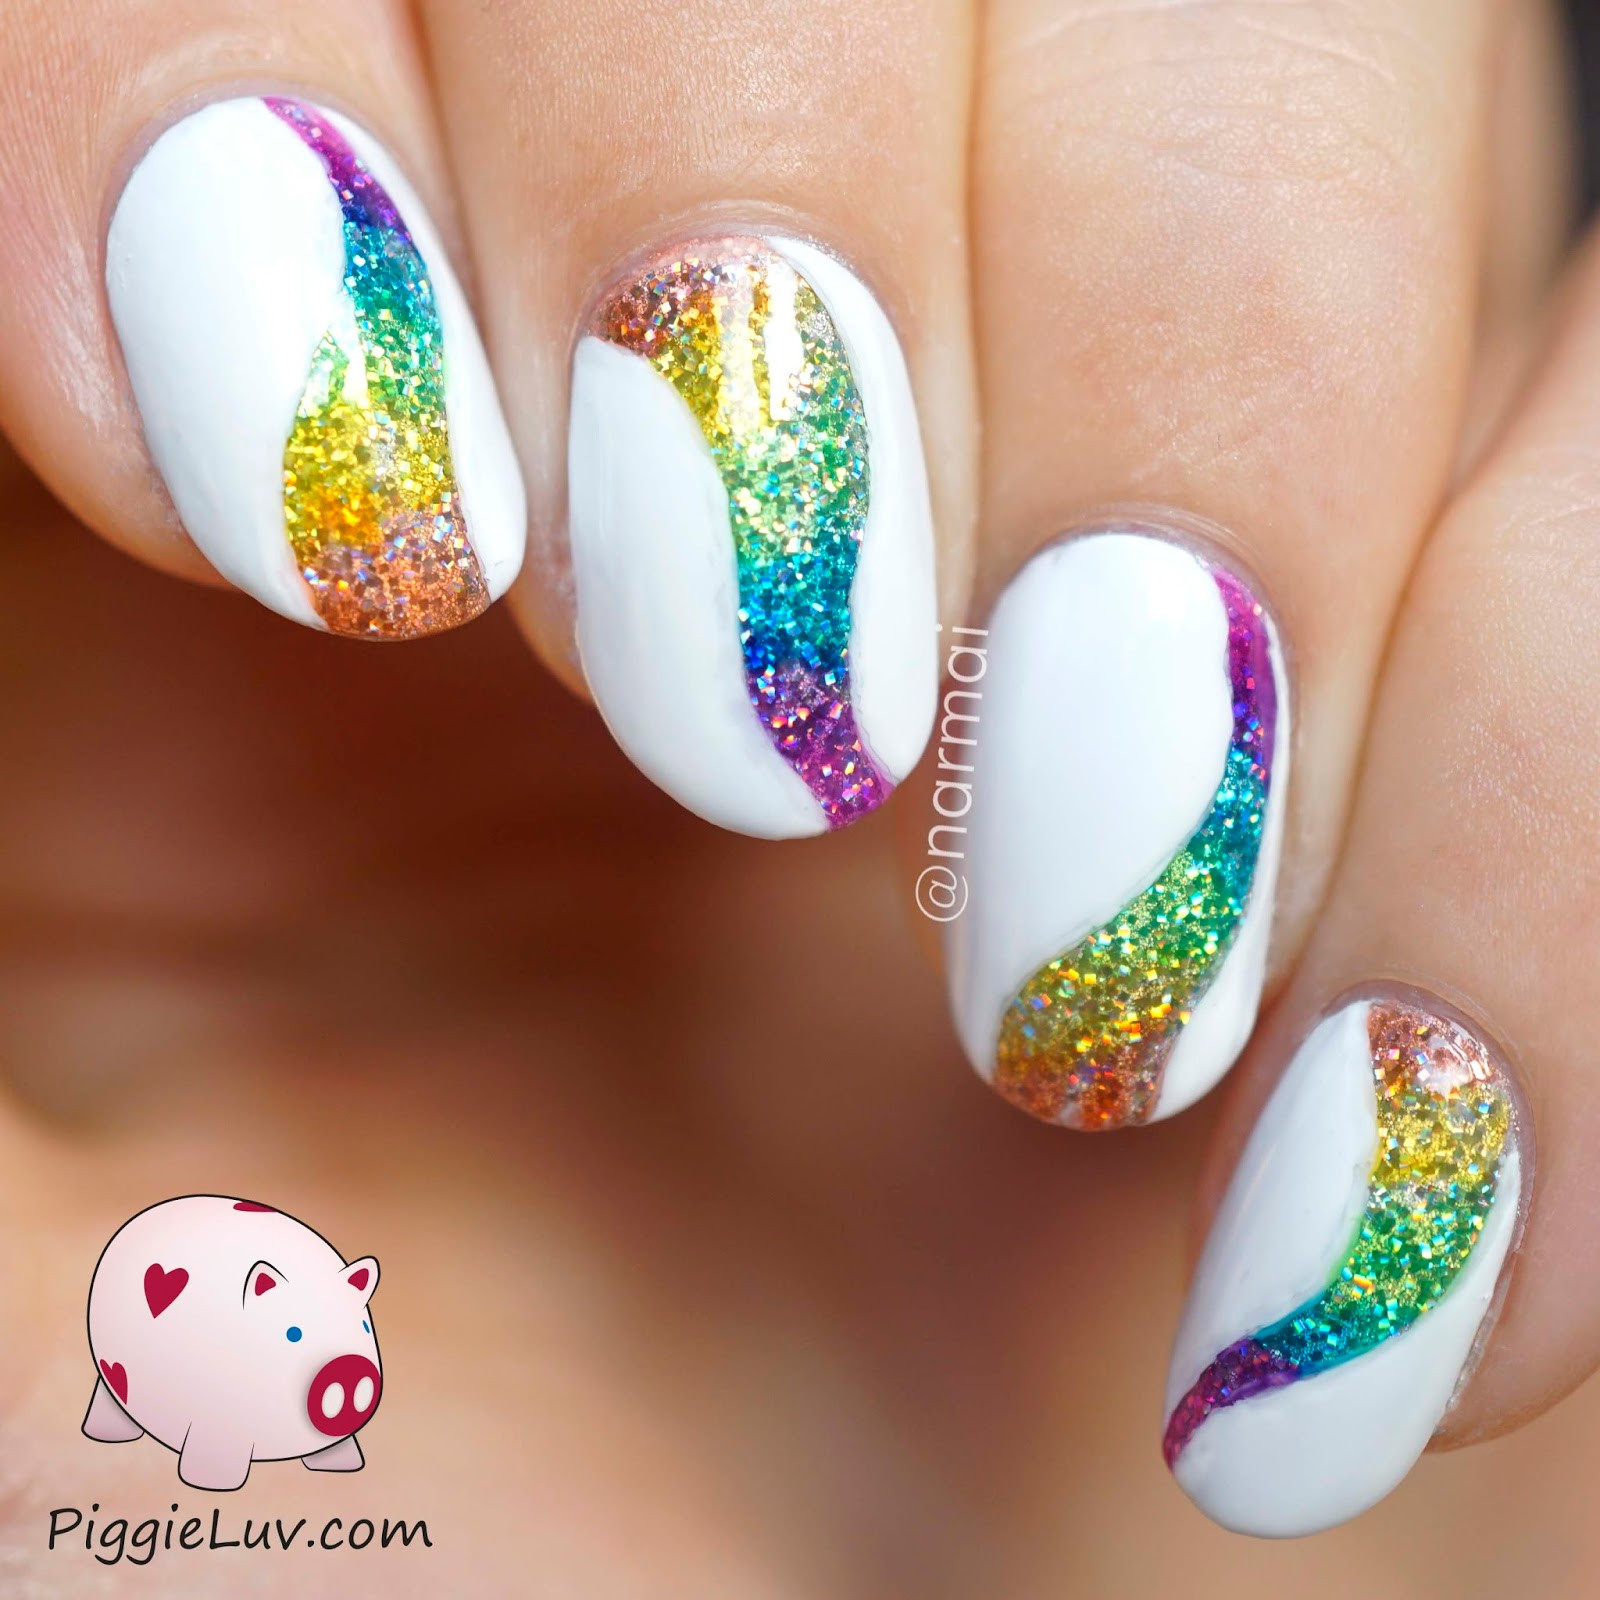 Glitter Nail Art Designs Pictures
 PiggieLuv Glitter tornado nail art with OPI Color Paints